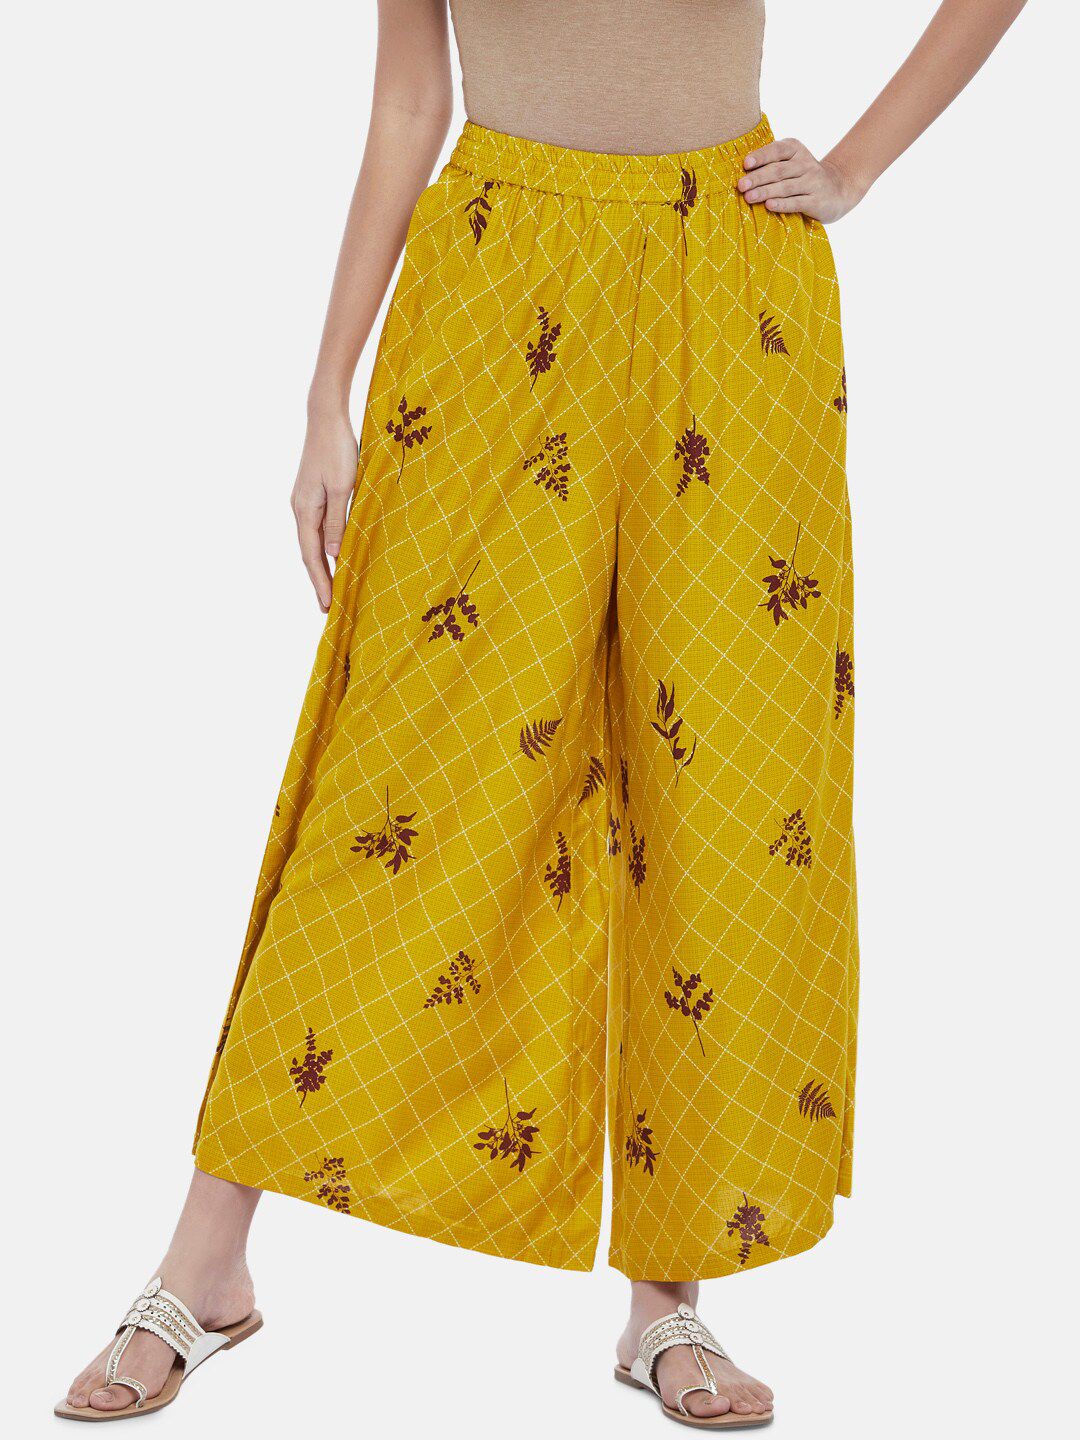 RANGMANCH BY PANTALOONS Women Mustard Yellow & Brown Floral Printed Ethnic Palazzos Price in India